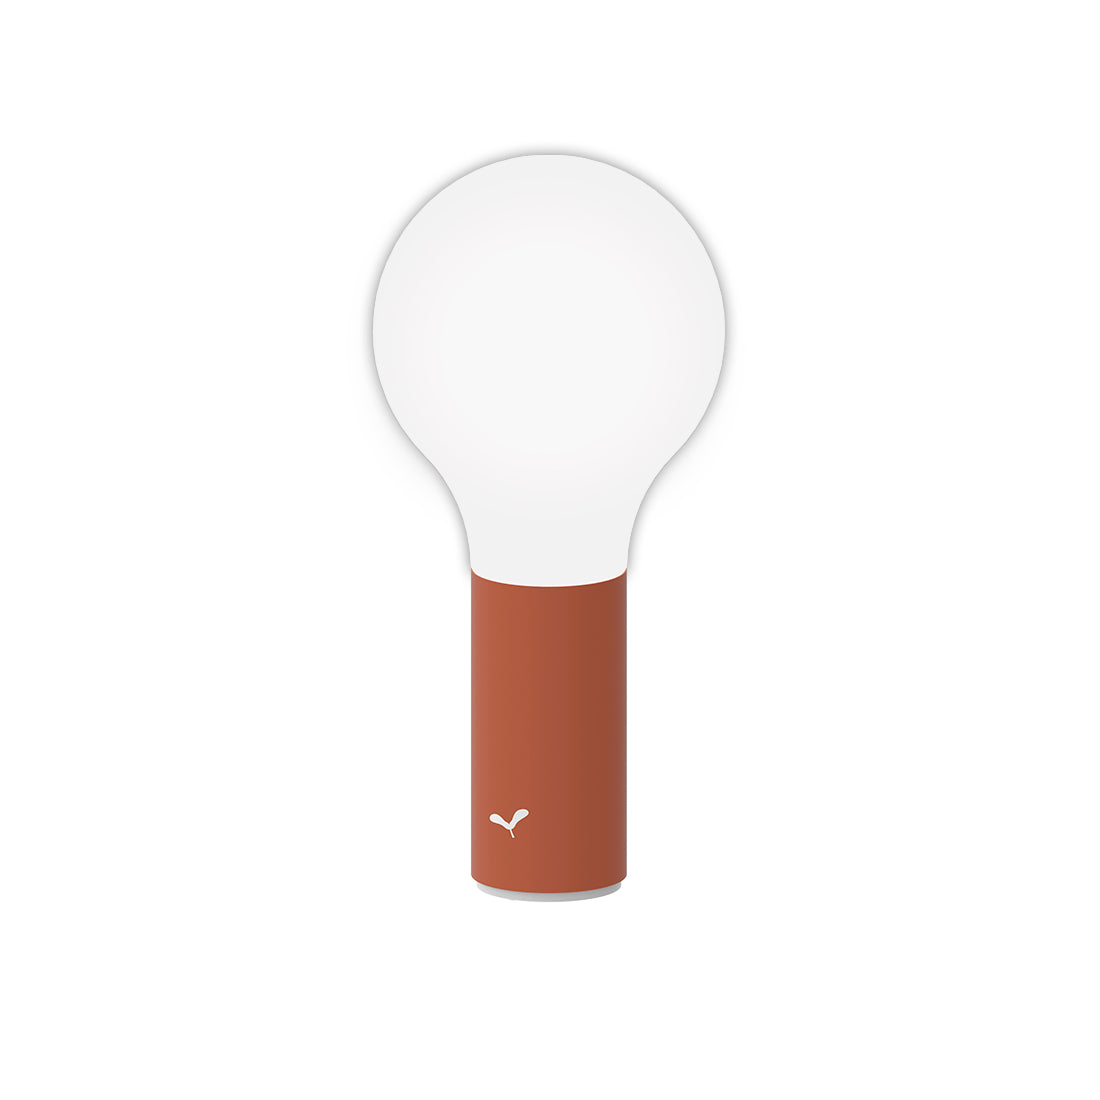 Fermob Aplô portable indoor and outdoor Lamp in Red Ochre in front of a white background. 